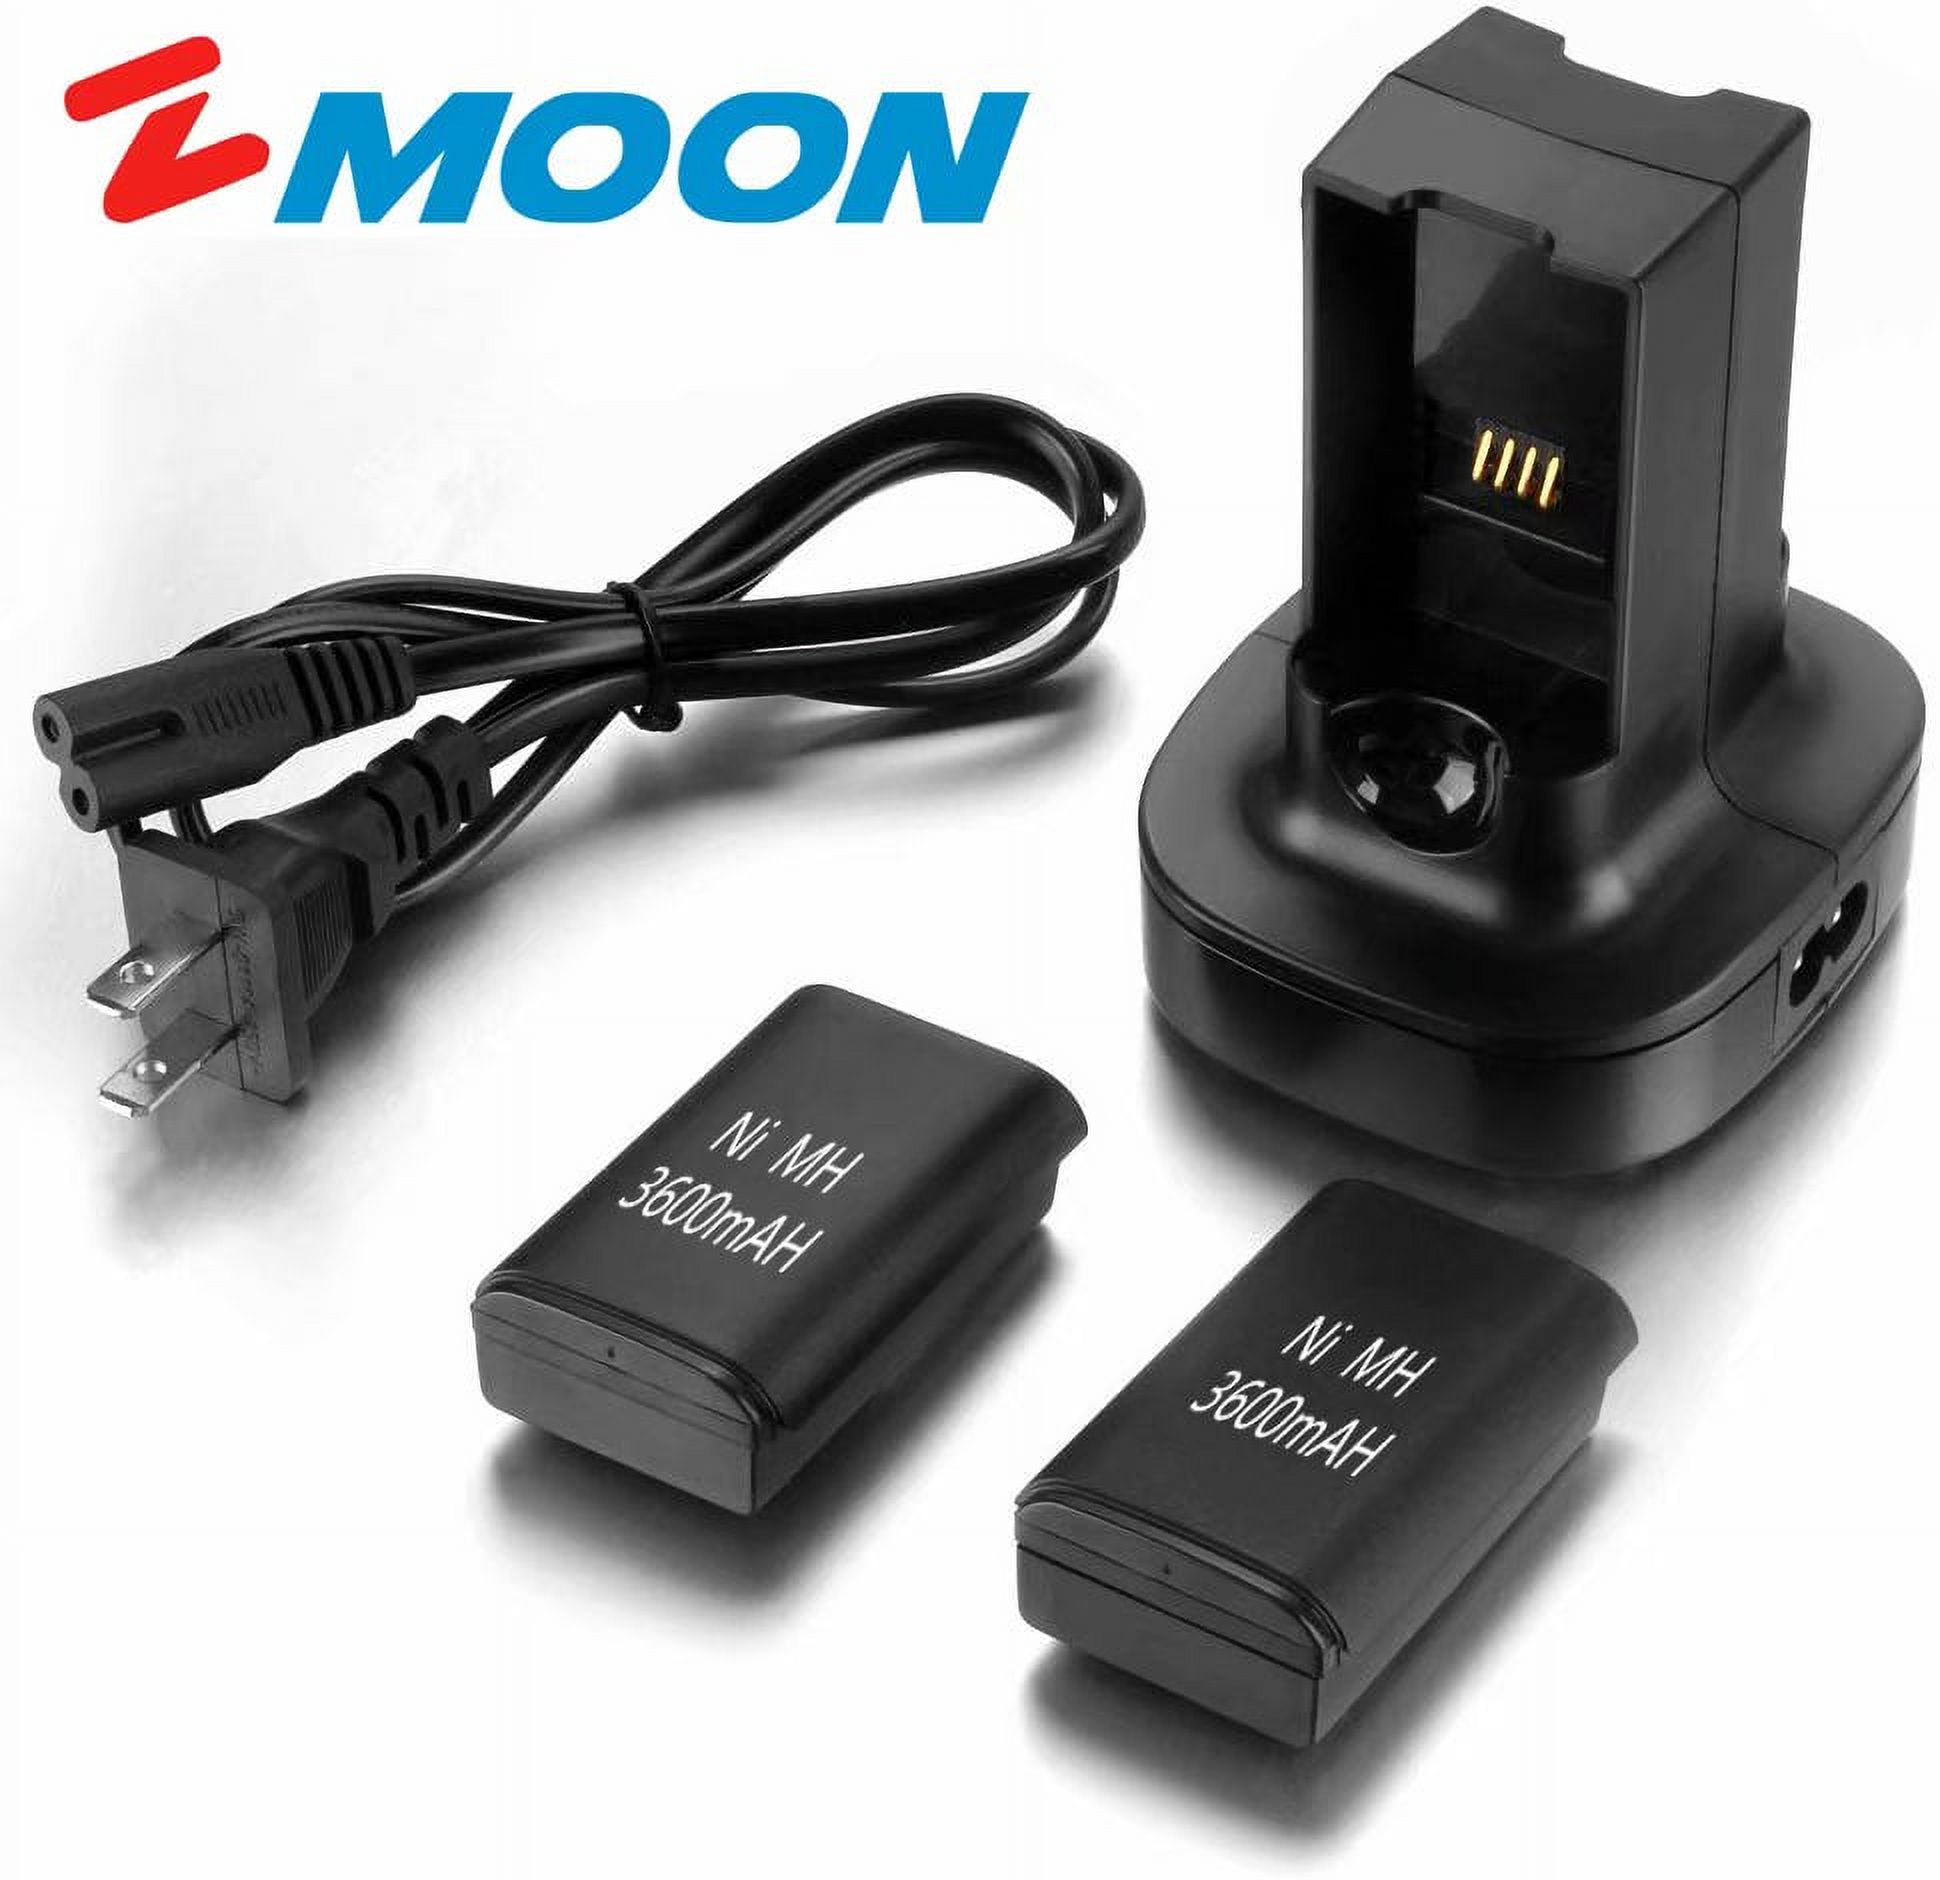 Zmoon Dual Battery Charger Dock Charging Station with Free 2-pack Rechargeable Battery For Xbox360 Microsoft Xbox 360 Remote Controller Xbox 360 Charger Kit - image 1 of 14